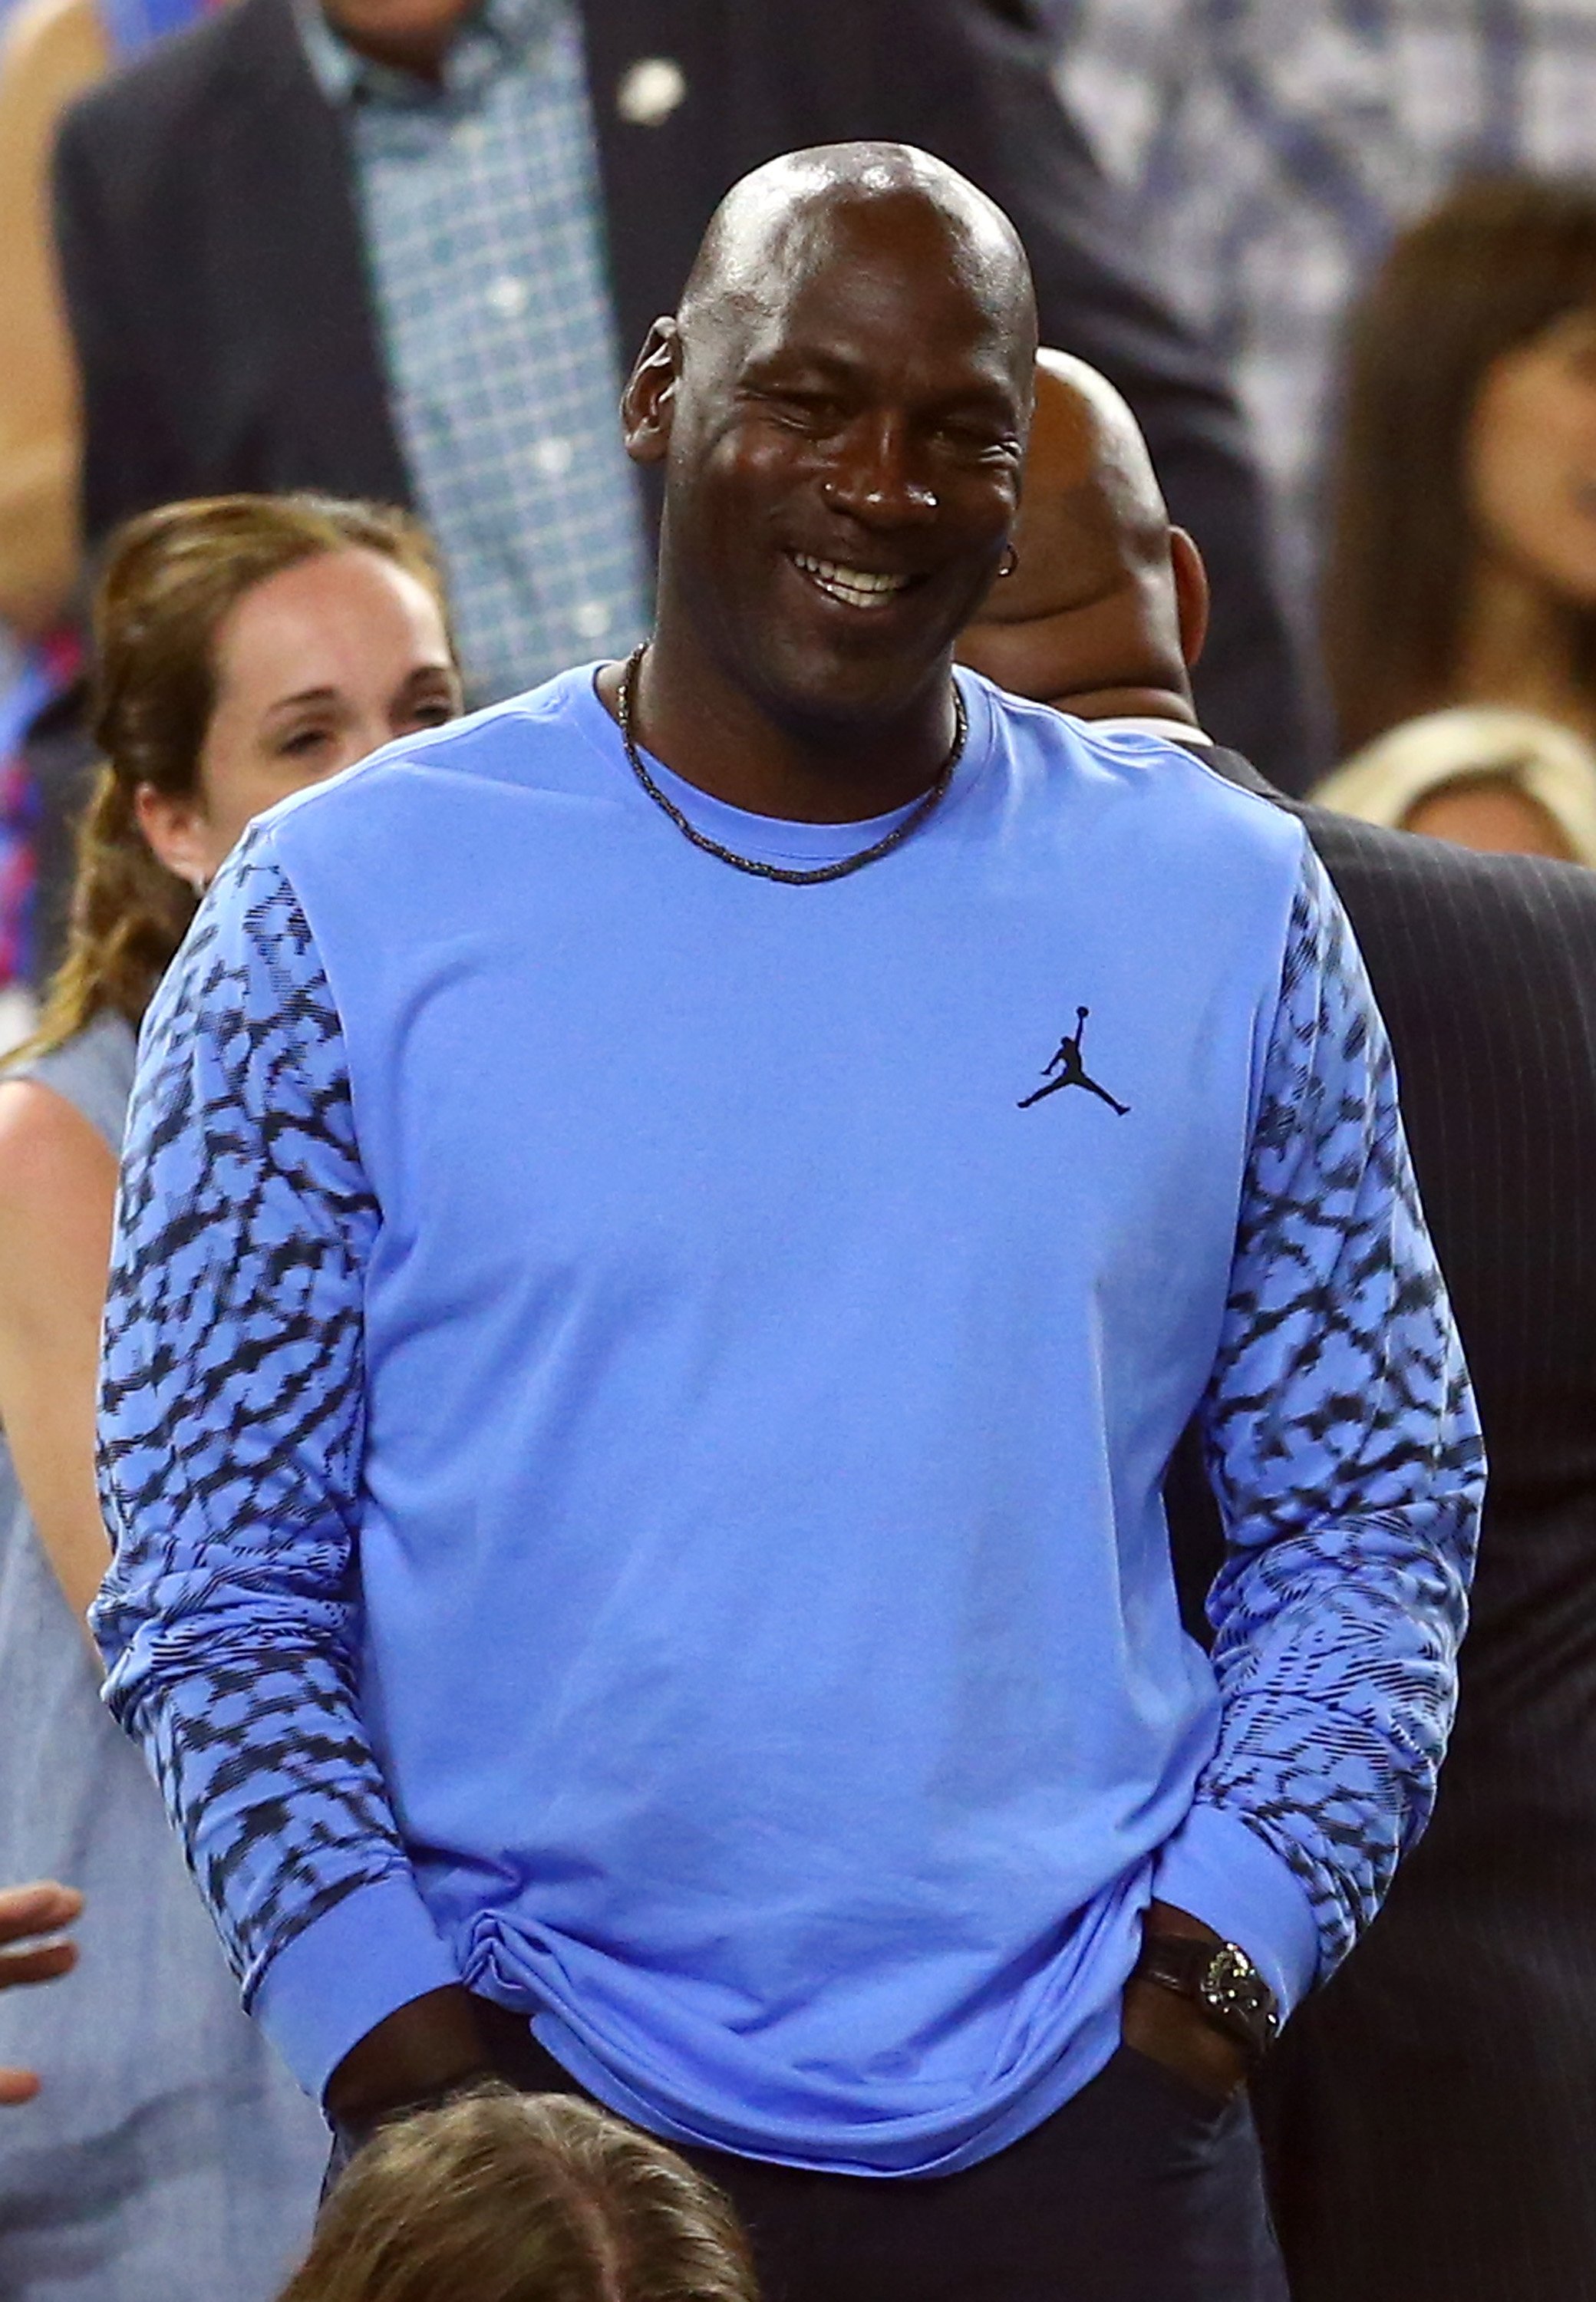 Michael Jordan reacts during the 2016 NCAA Men's Final Four National Championship game. | Source: Getty Images